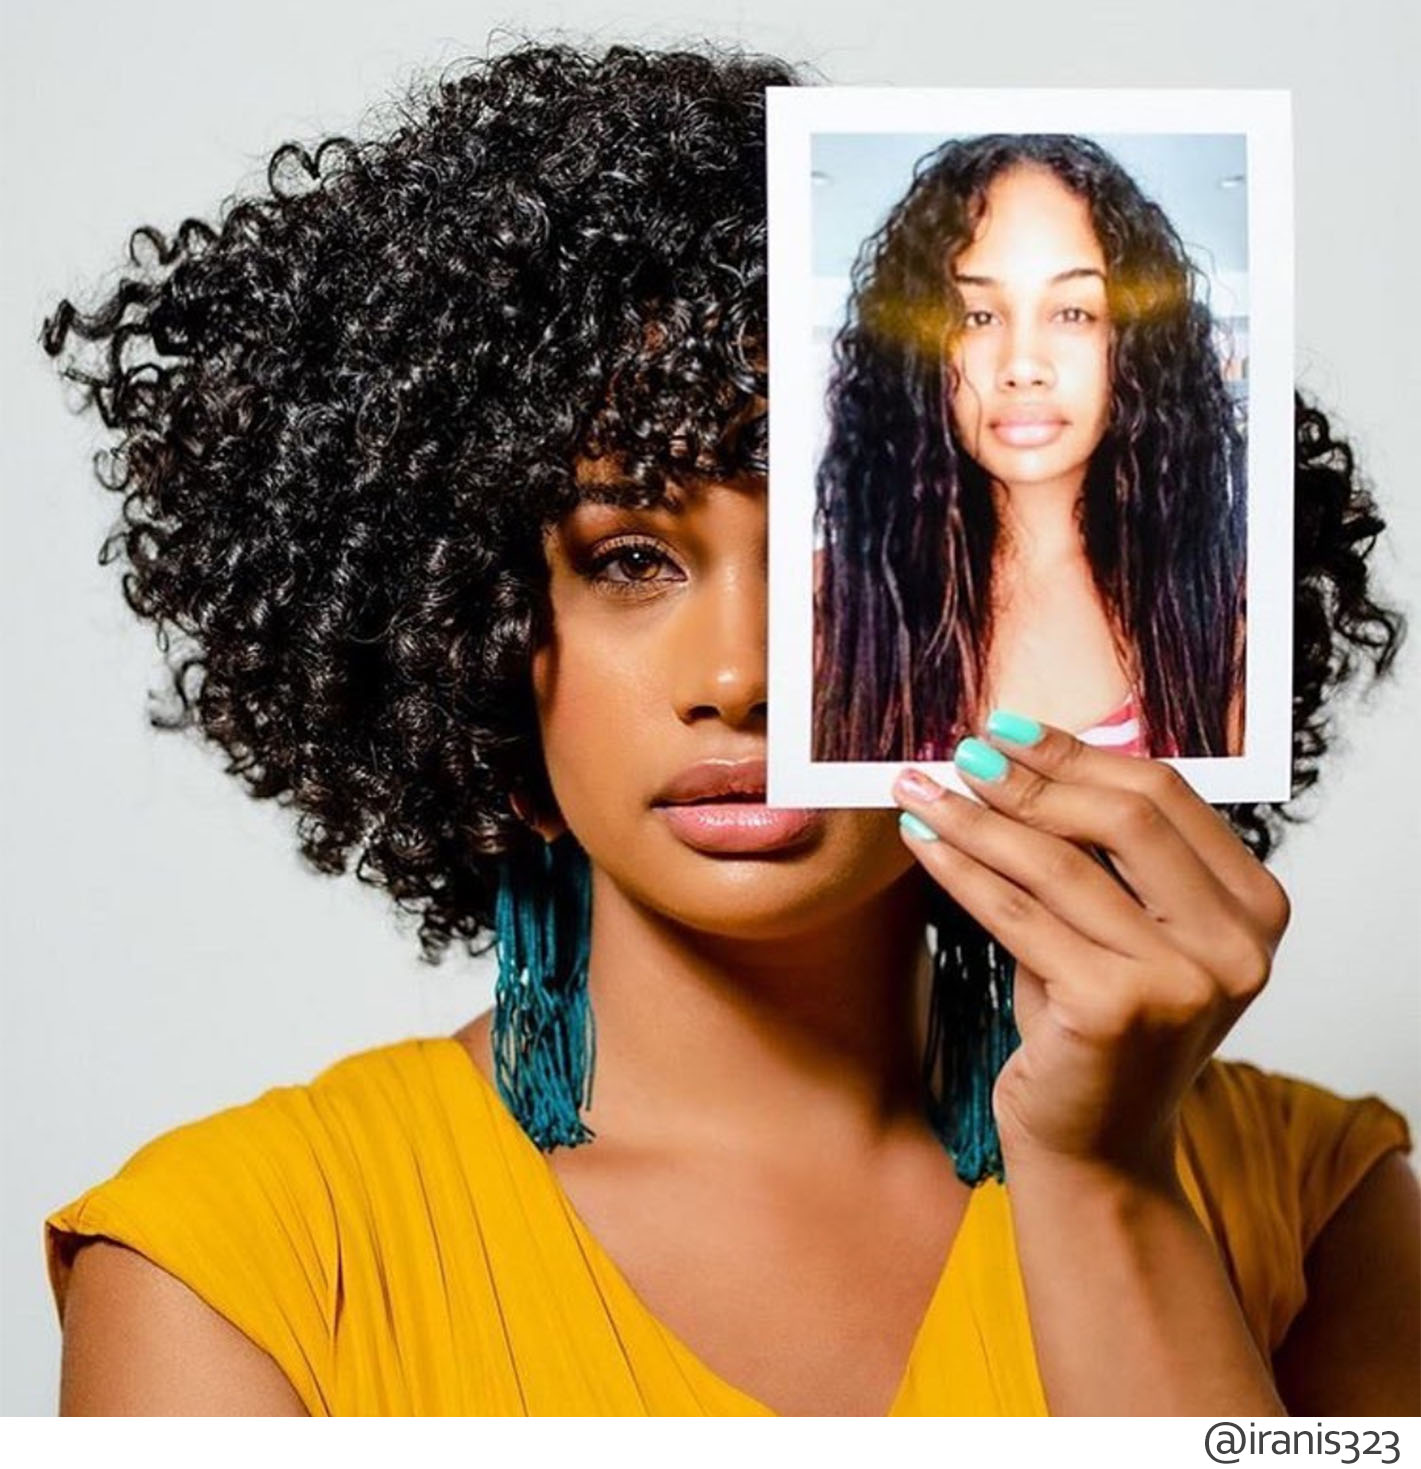 5 Common Misconceptions About Natural Hair